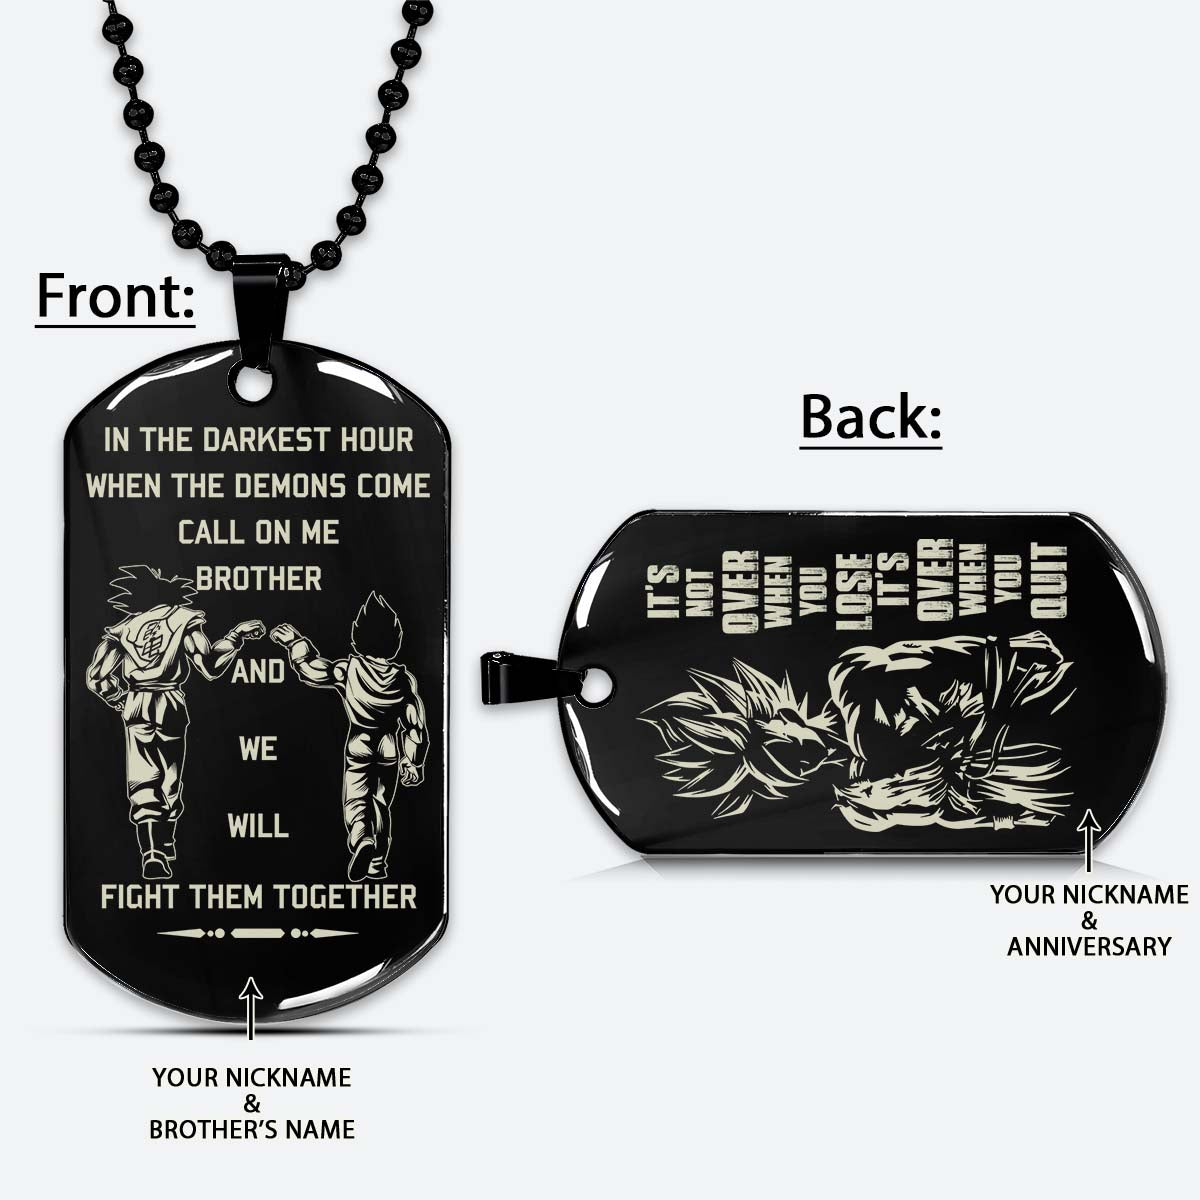 DRD024 - Call On Me Brother - It's Not Over When You Lose - It's Over When You Quit - Goku - Super Saiyan Blue - Dragon Ball Dog Tag - Engrave Double Black Dog Tag